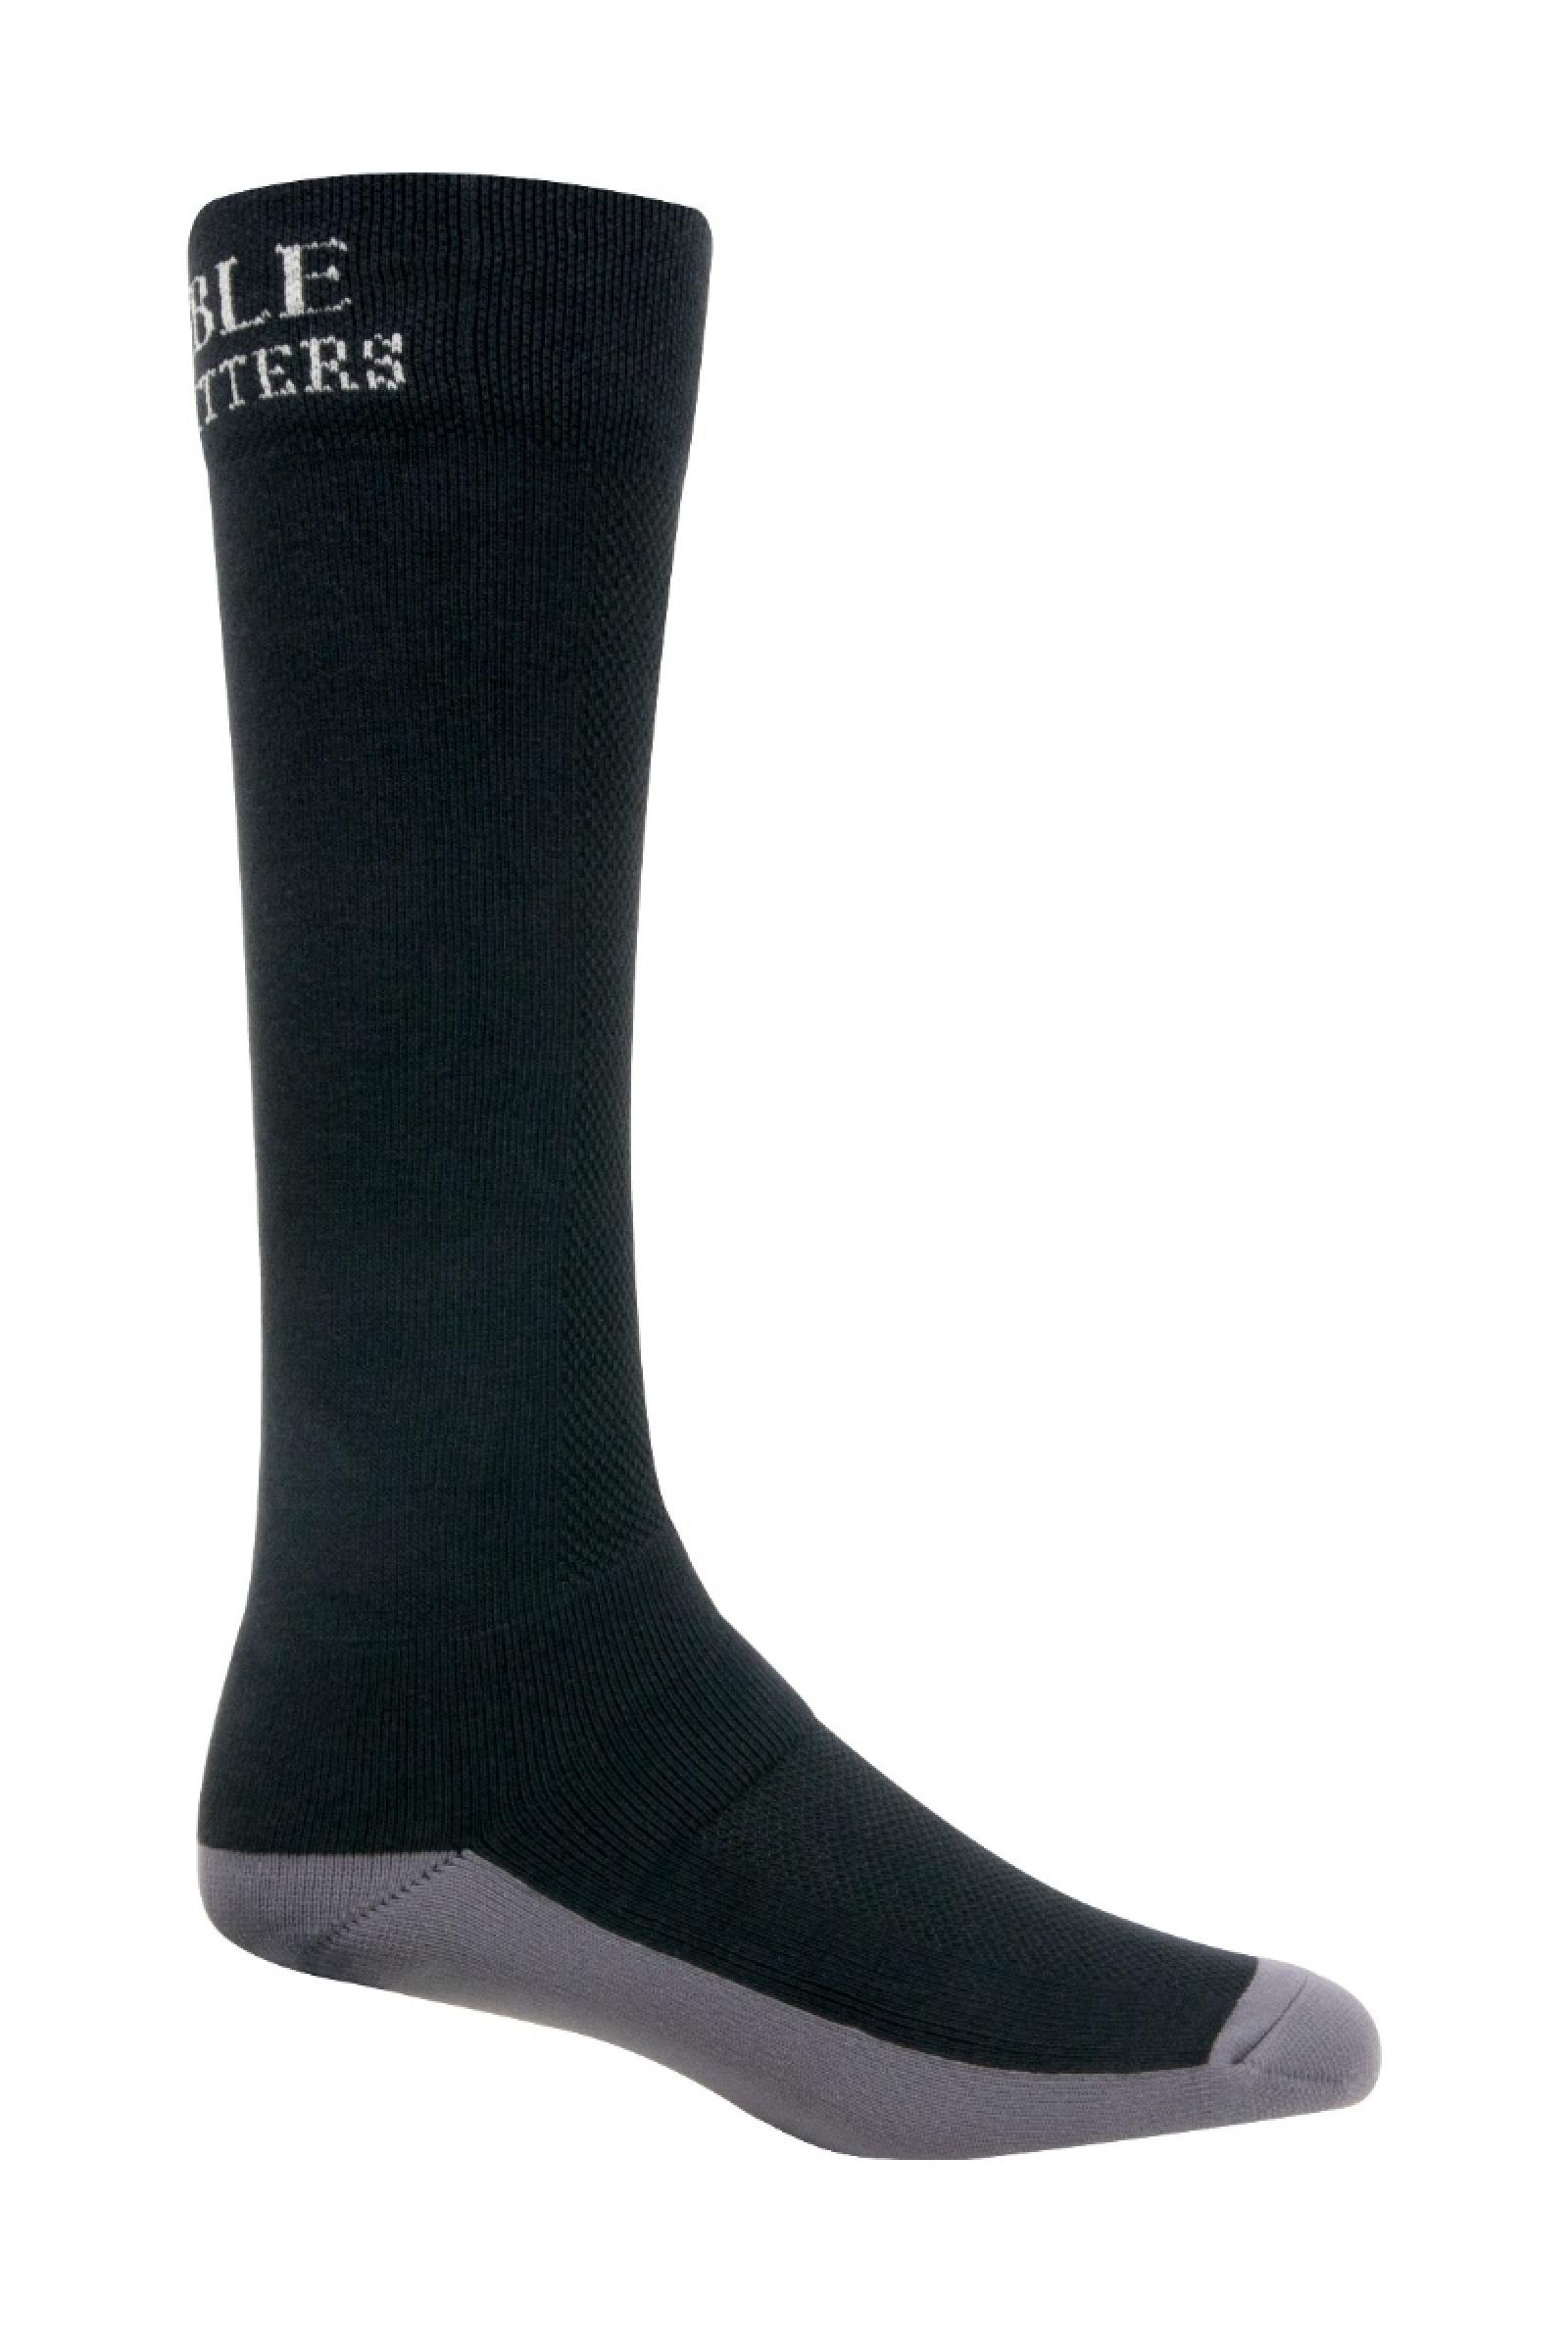 Noble Outfitters Xtreme Soft Work Sock